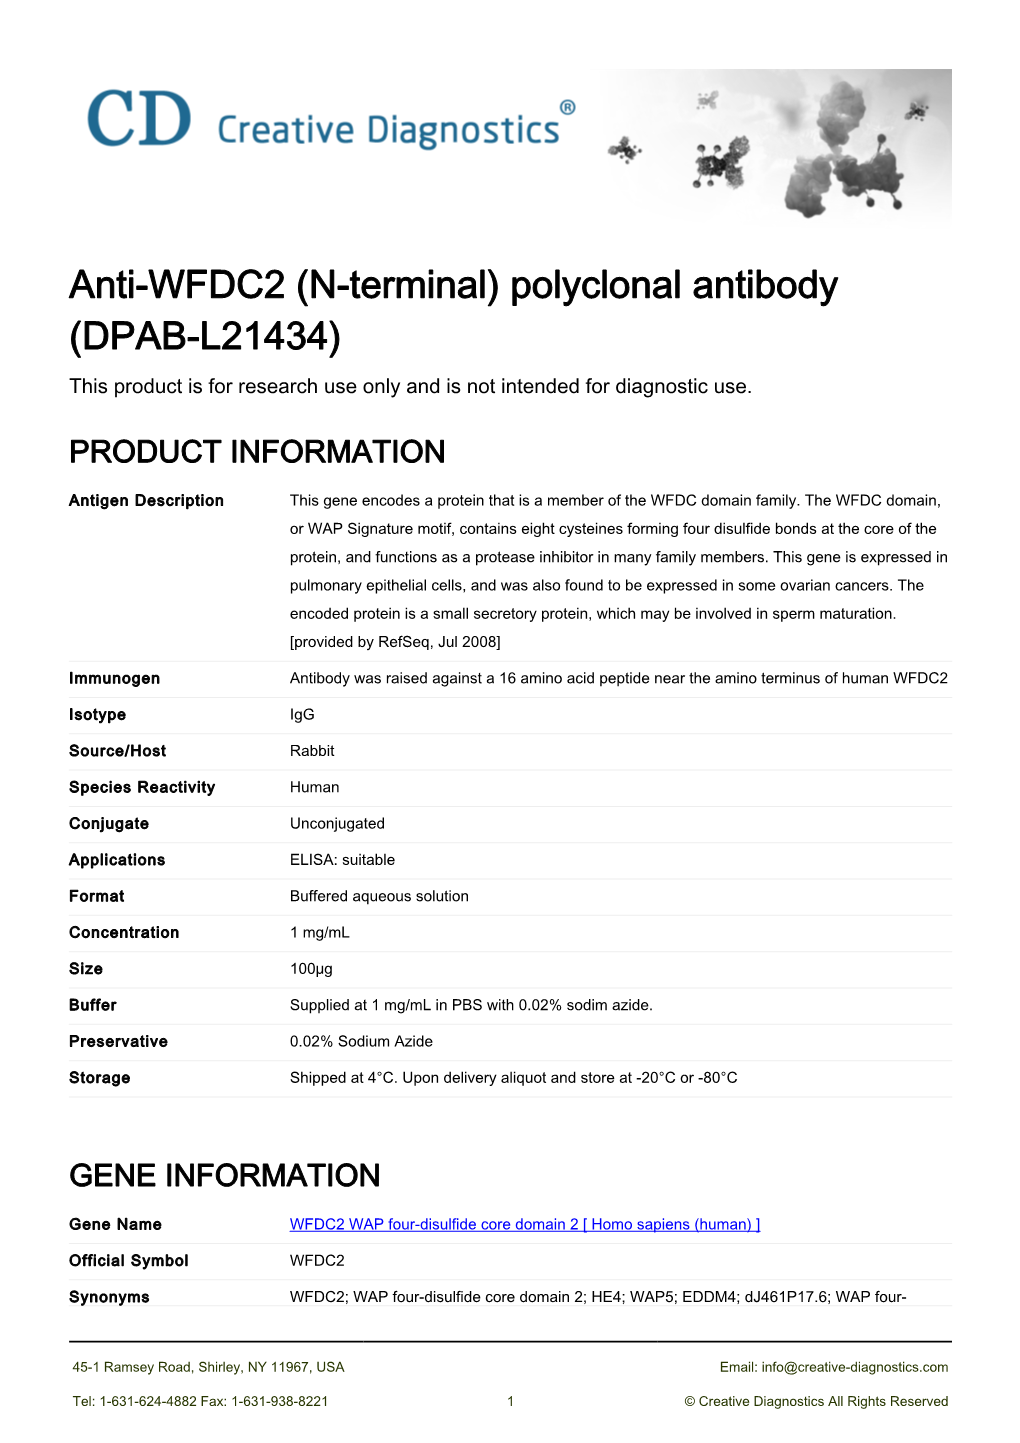 Anti-WFDC2 (N-Terminal) Polyclonal Antibody (DPAB-L21434) This Product Is for Research Use Only and Is Not Intended for Diagnostic Use